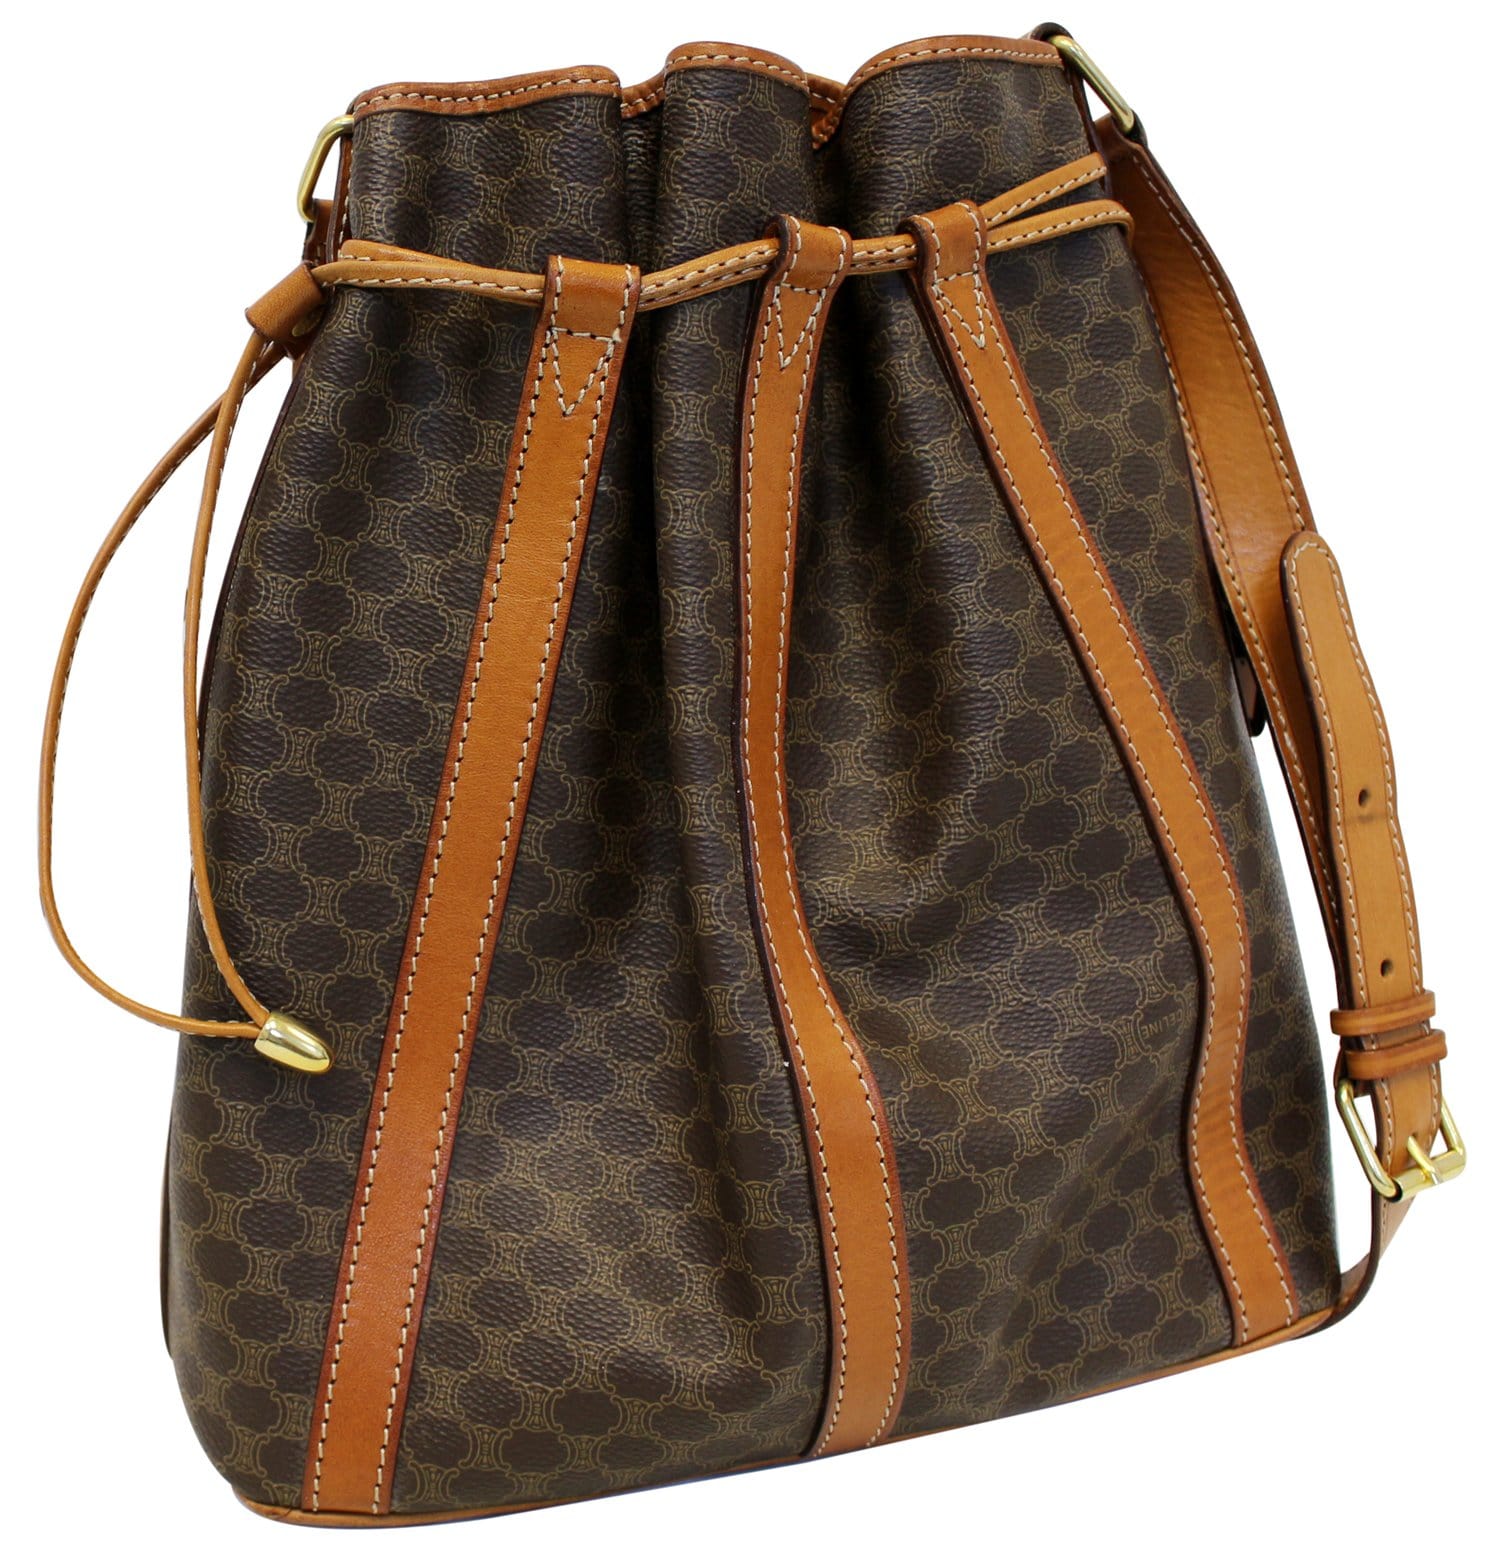 Chanel, Louis Vuitton, Celine: Come See the Amazing Bags From